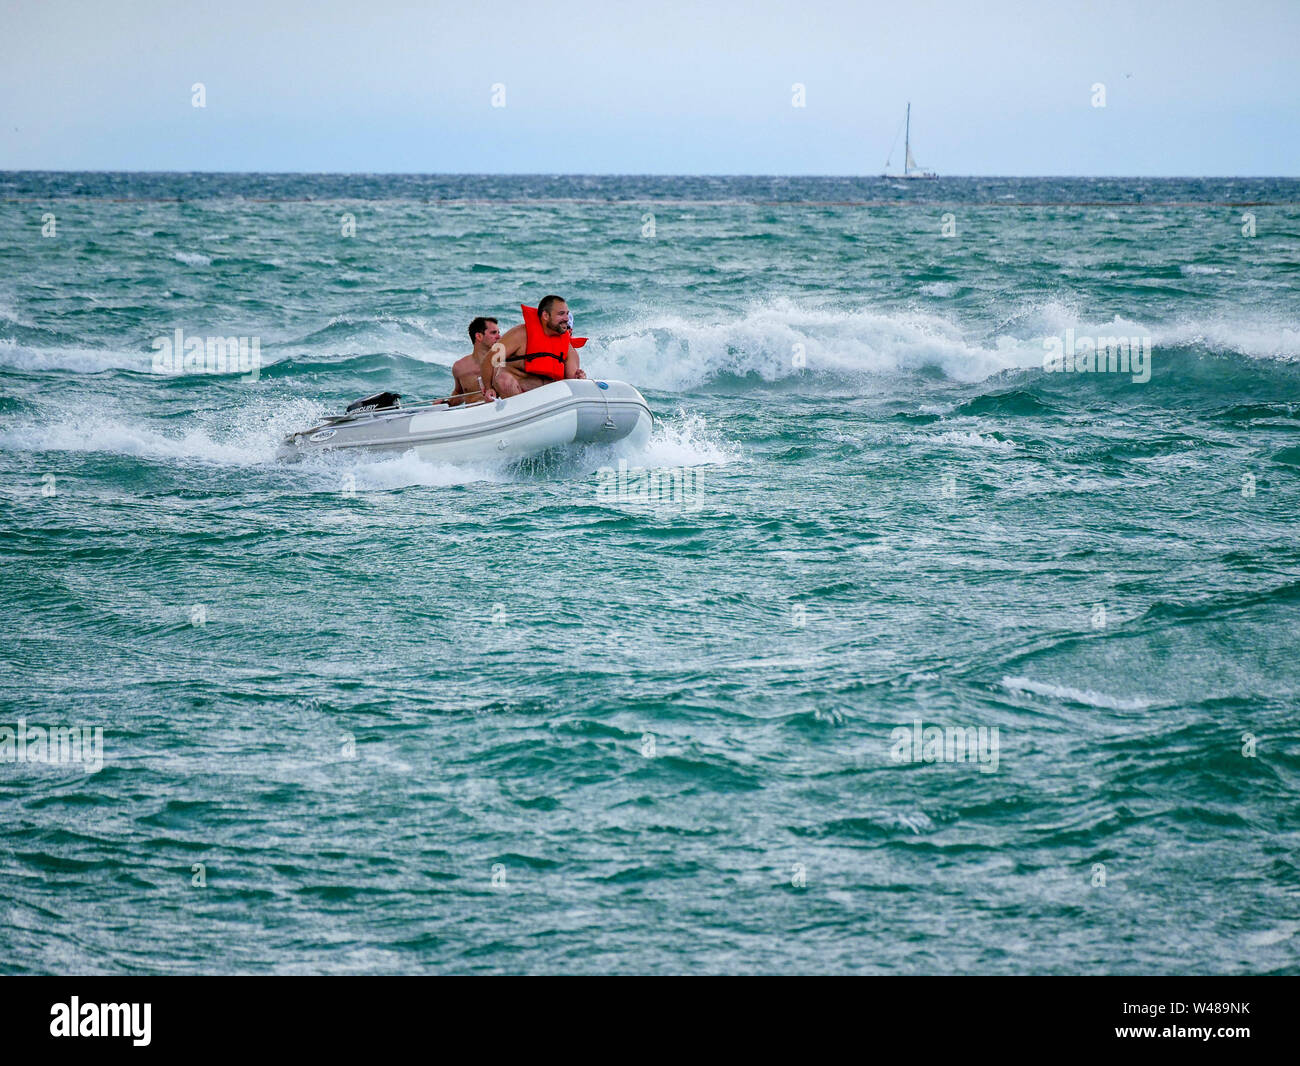 Men in a motorized inflatable dinghy, choppy water, Lake Michigan, Chicago, Illinois. Stock Photo